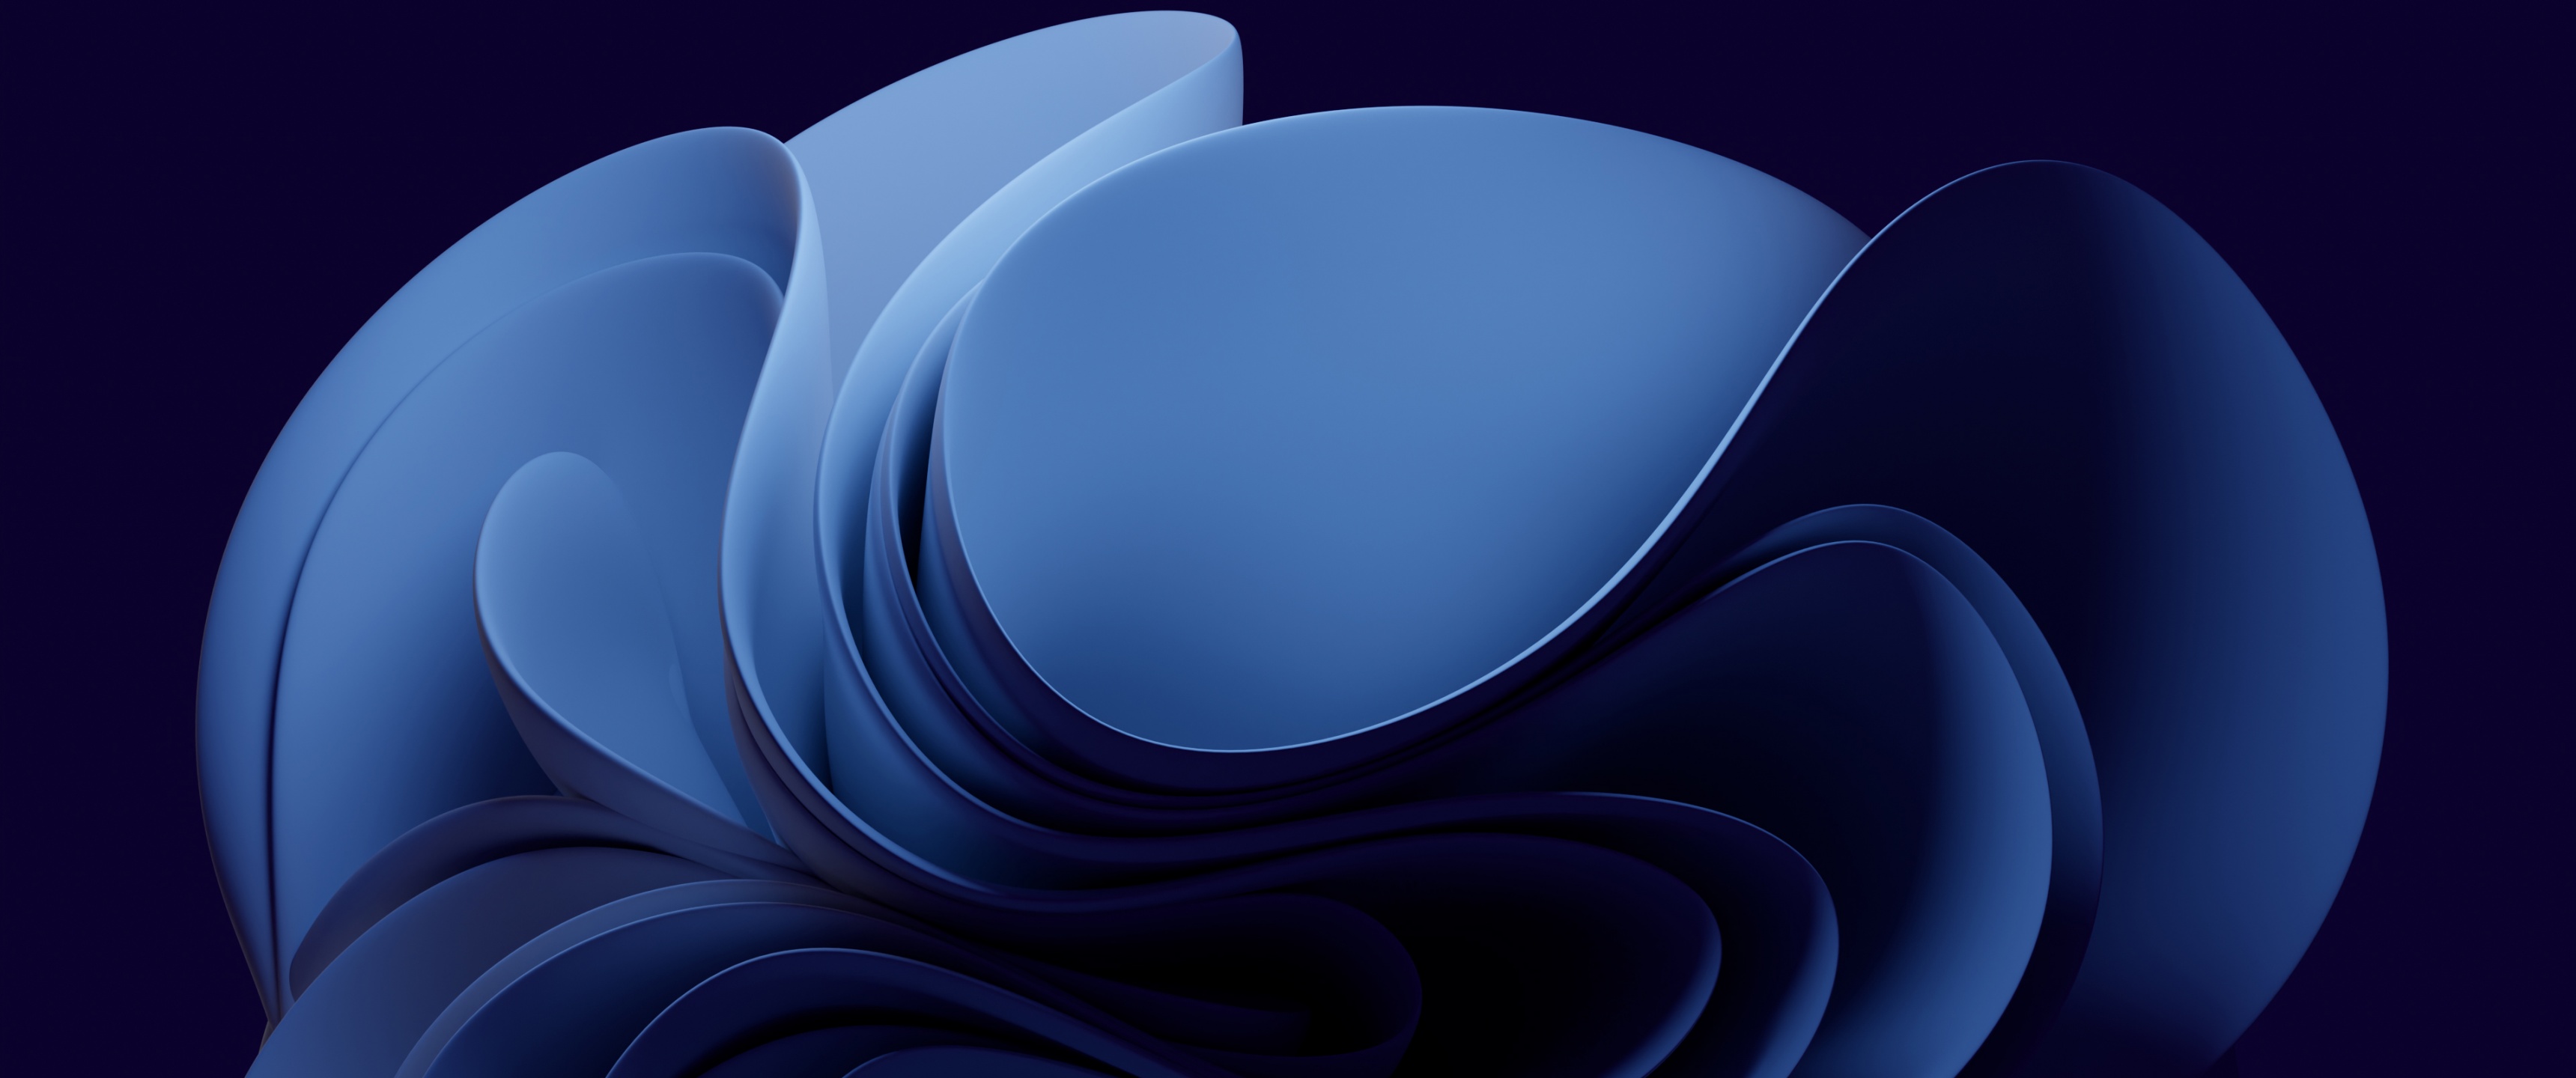 Blue background Wallpaper 4K, Abstract background, #8846